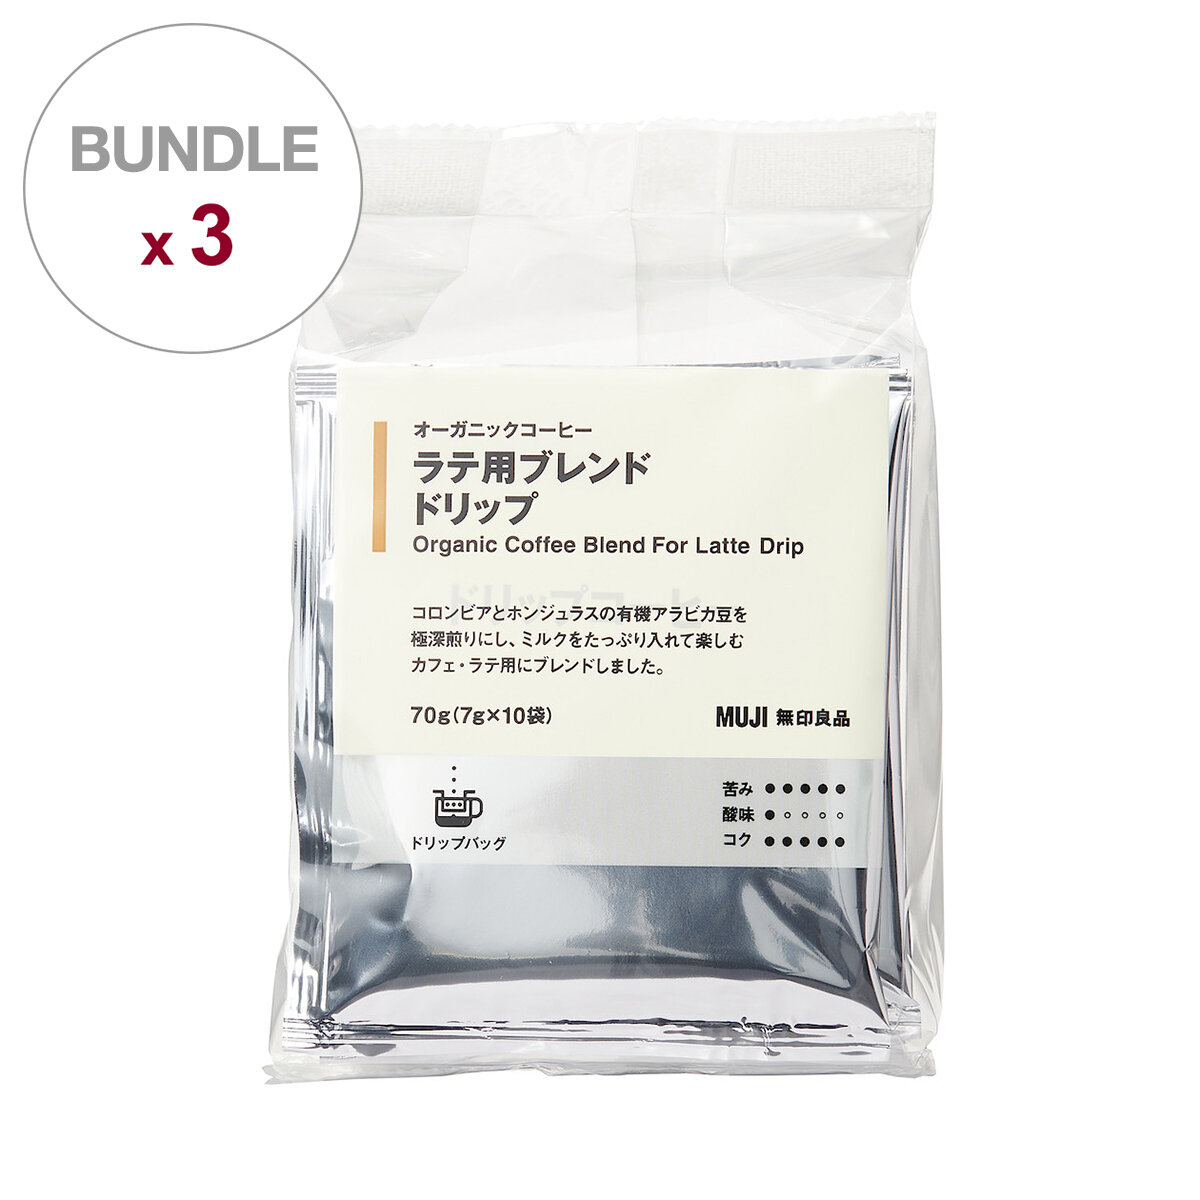 Organic Coffee Blend For Latte Drip【3 pcs】(At least 30-day serving period)